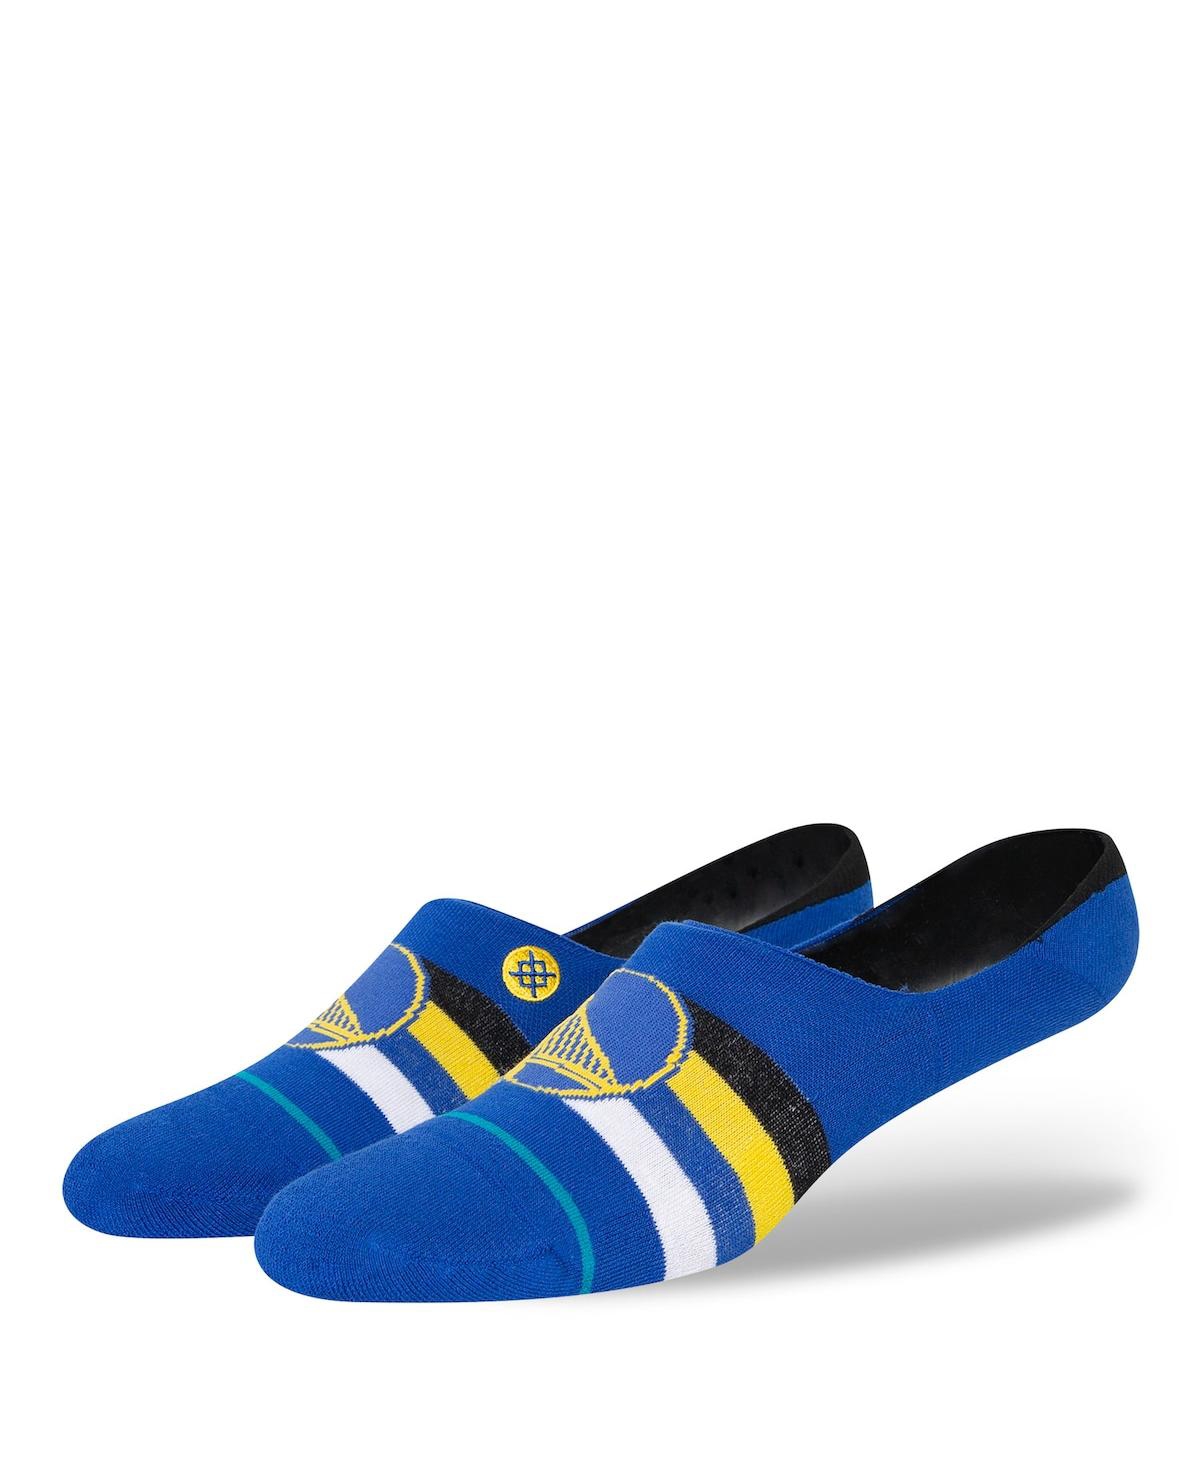 Stance Men's And Women's  Golden State Warriors Stripe No Show Socks In Royal